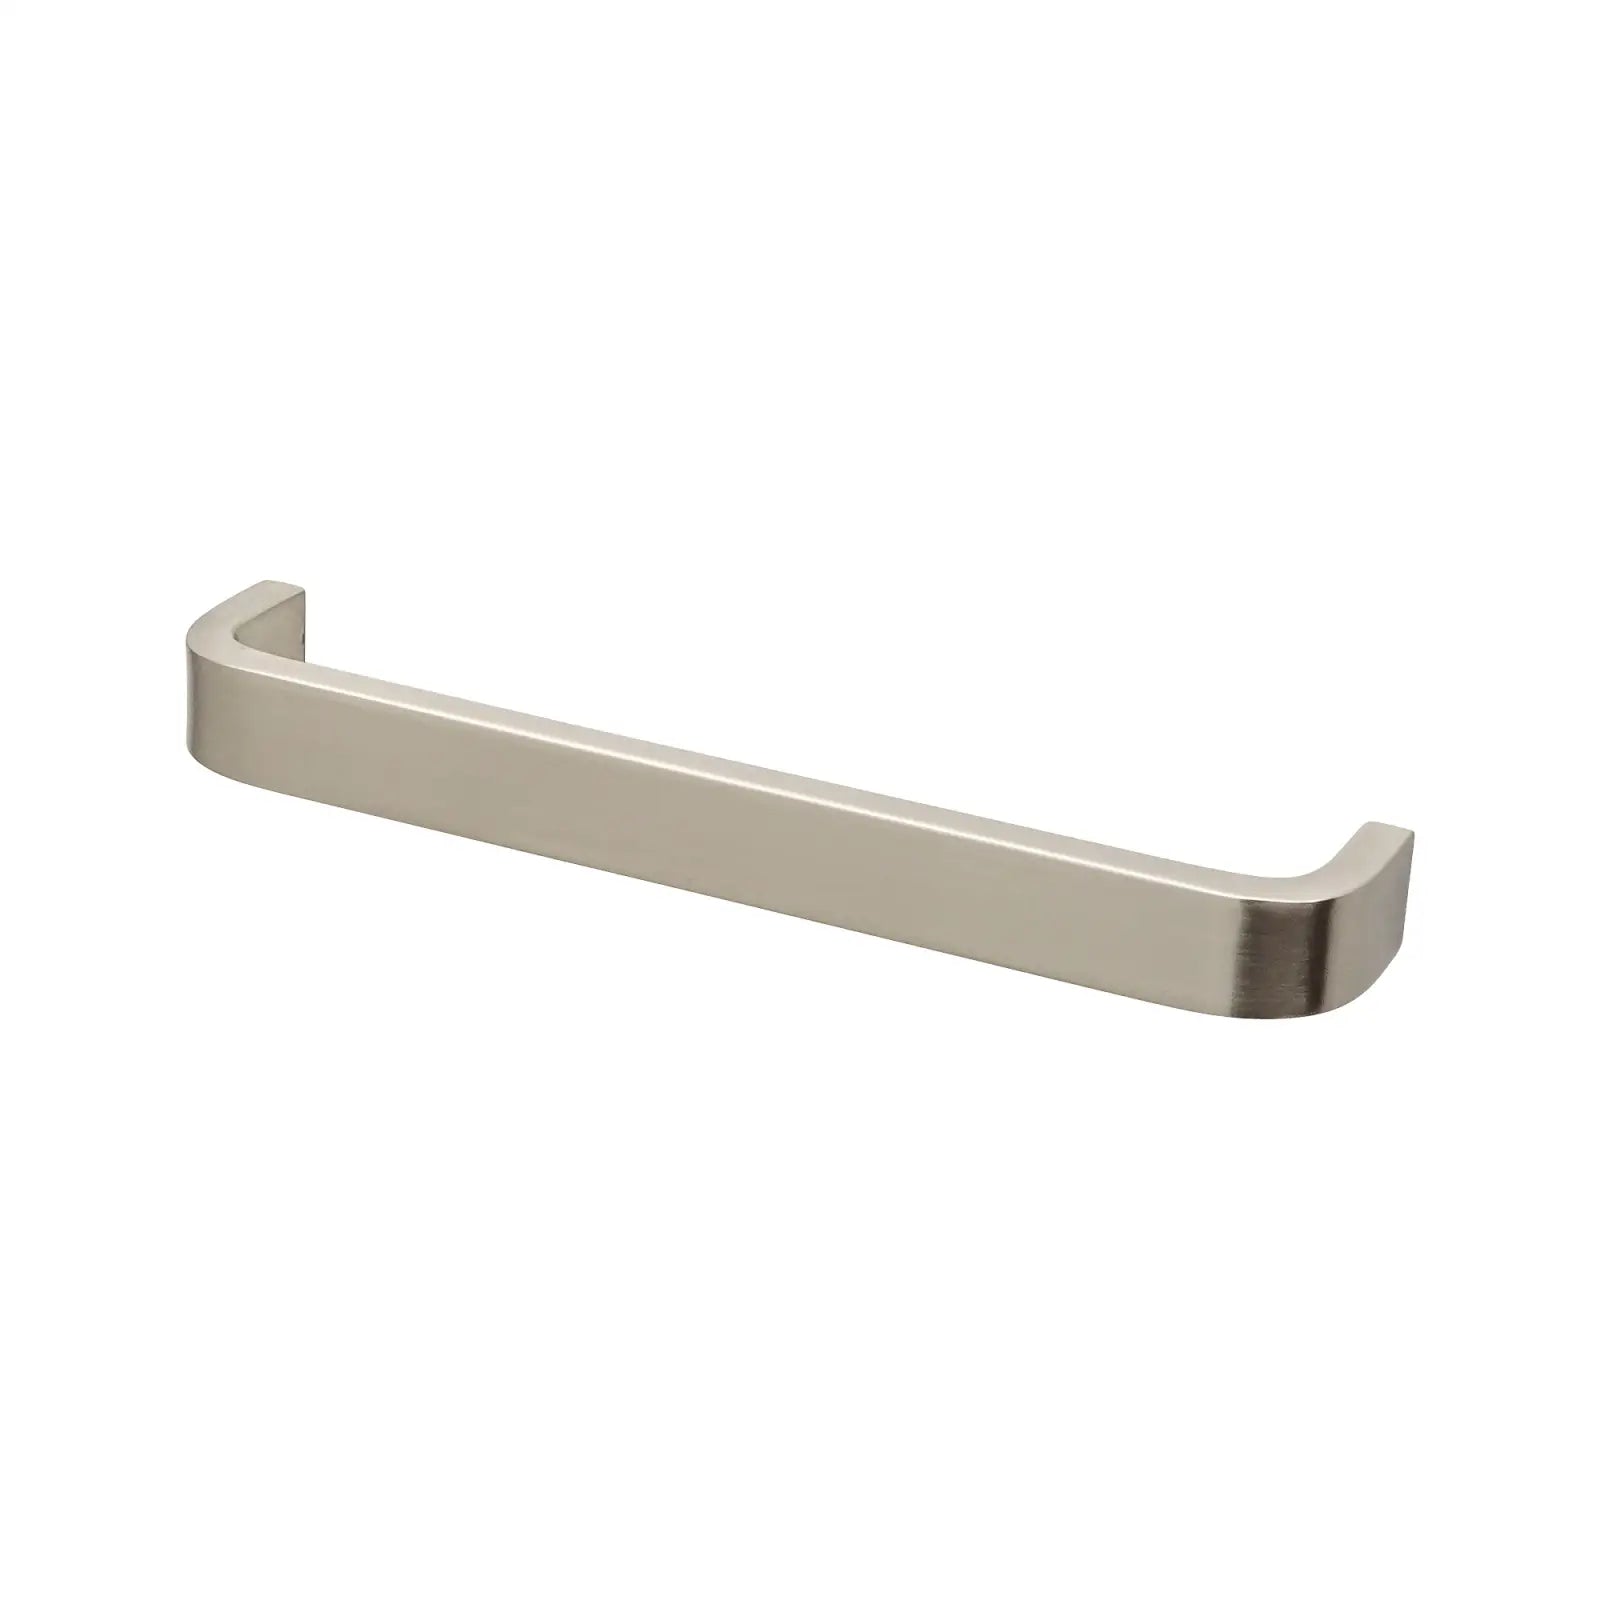 Sable - D Shaped Kitchen Handle - Satin Nickel - Decor And Decor